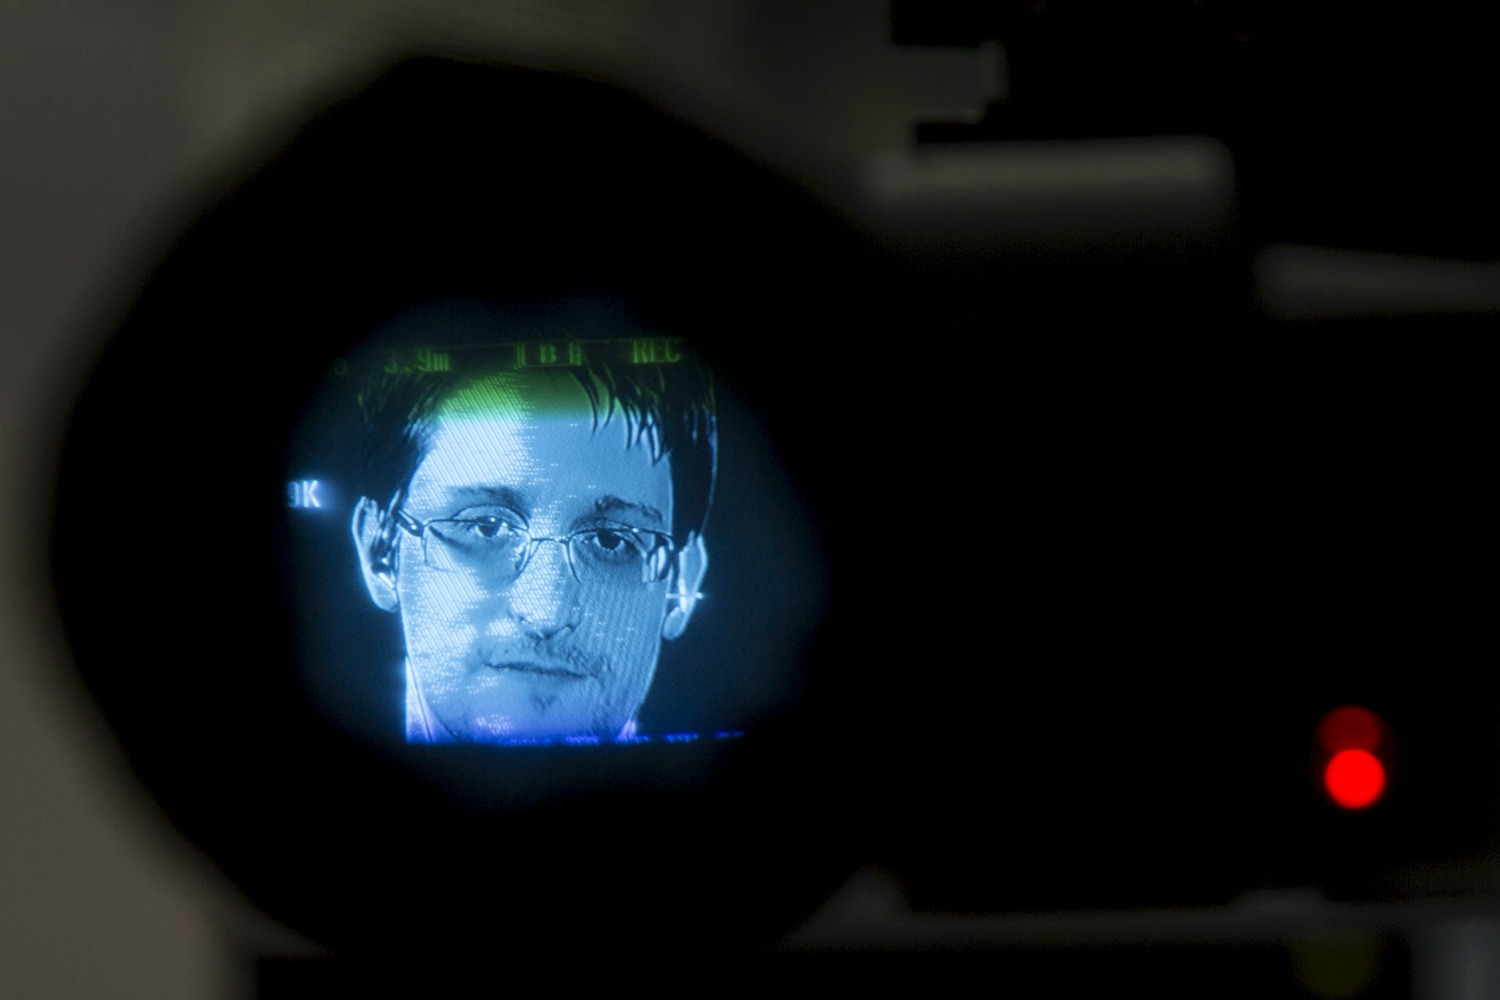 The Euro Parliament votes in favor of protecting Edward Snowden